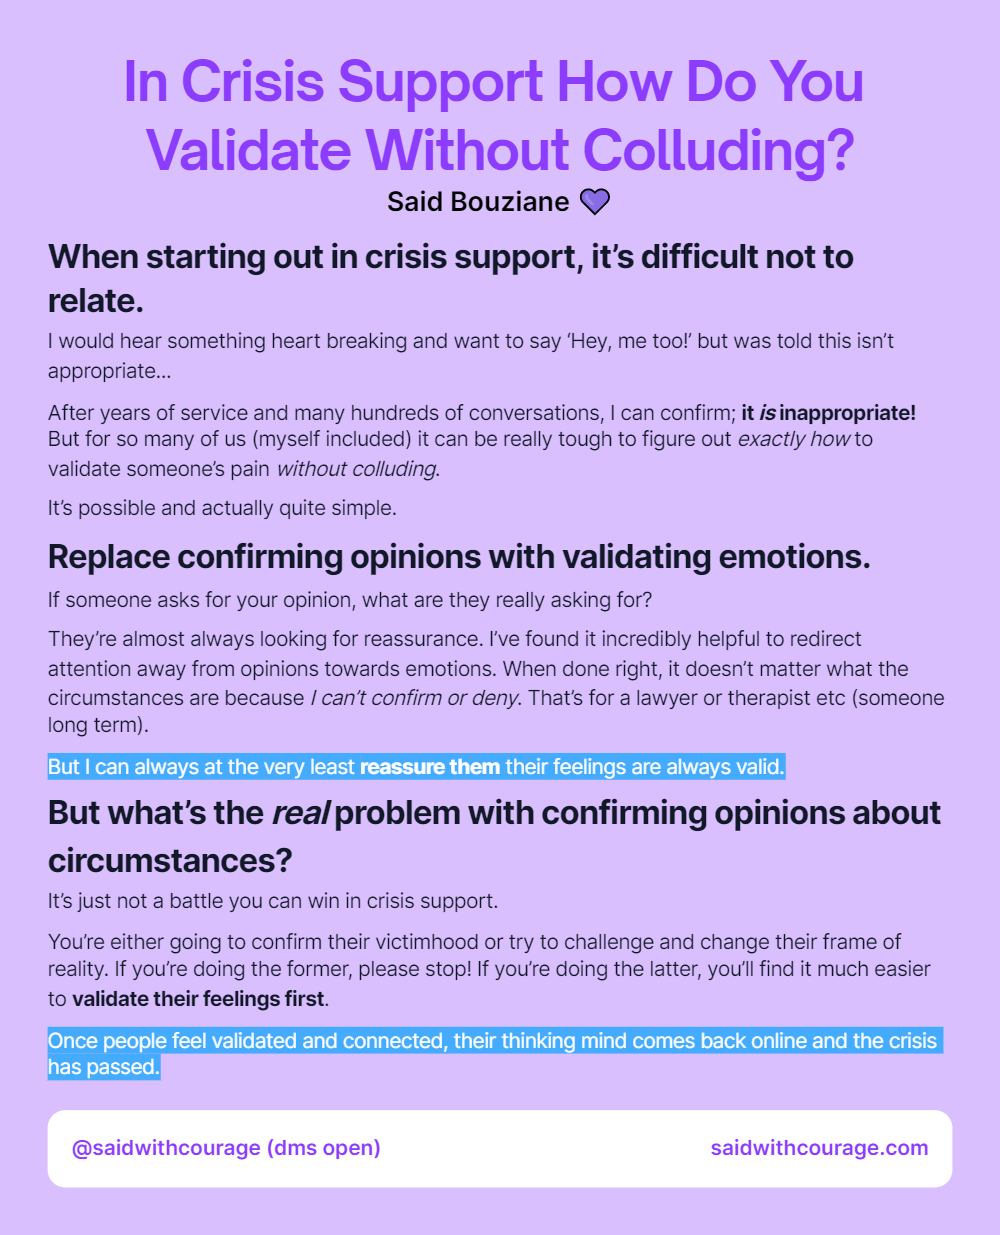 In Crisis Support How Do You Validate Without Colluding?